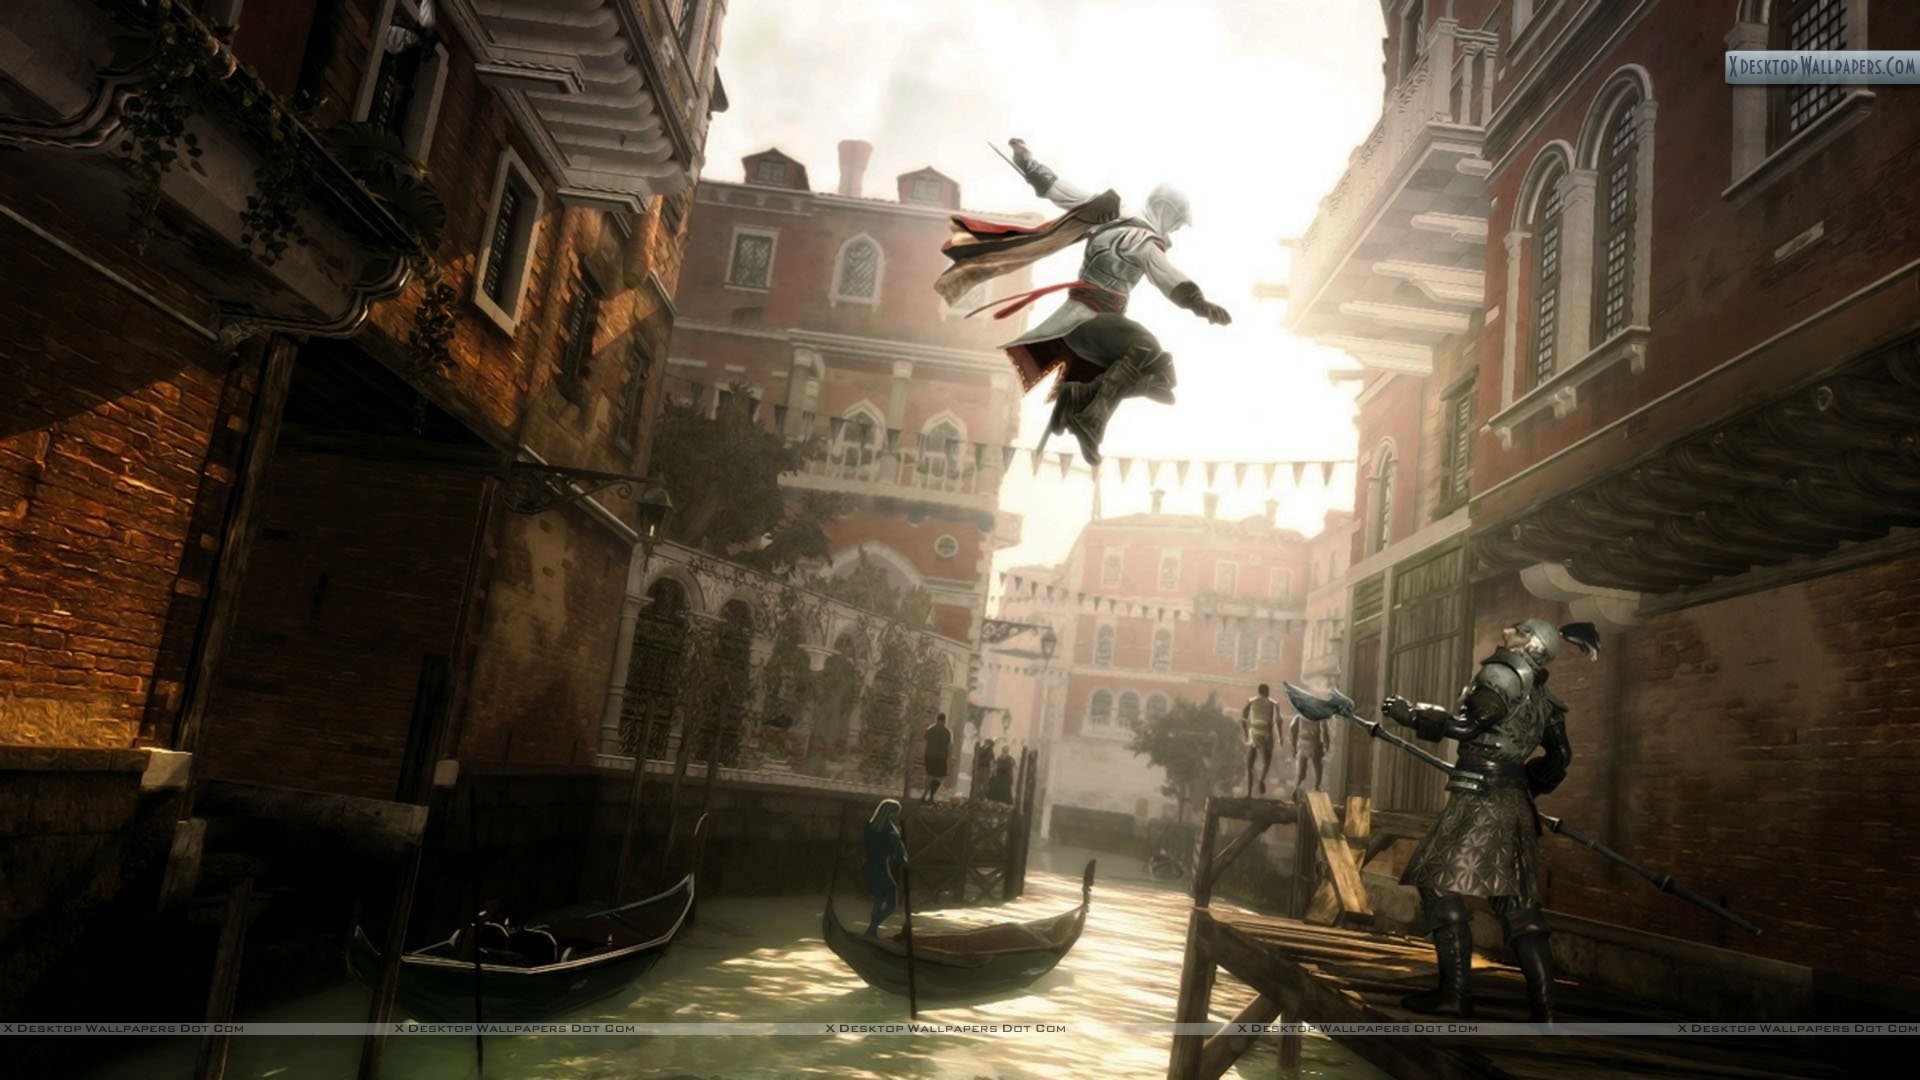 1920x1080 Categories: Games. Tags: Assassins Creed 2